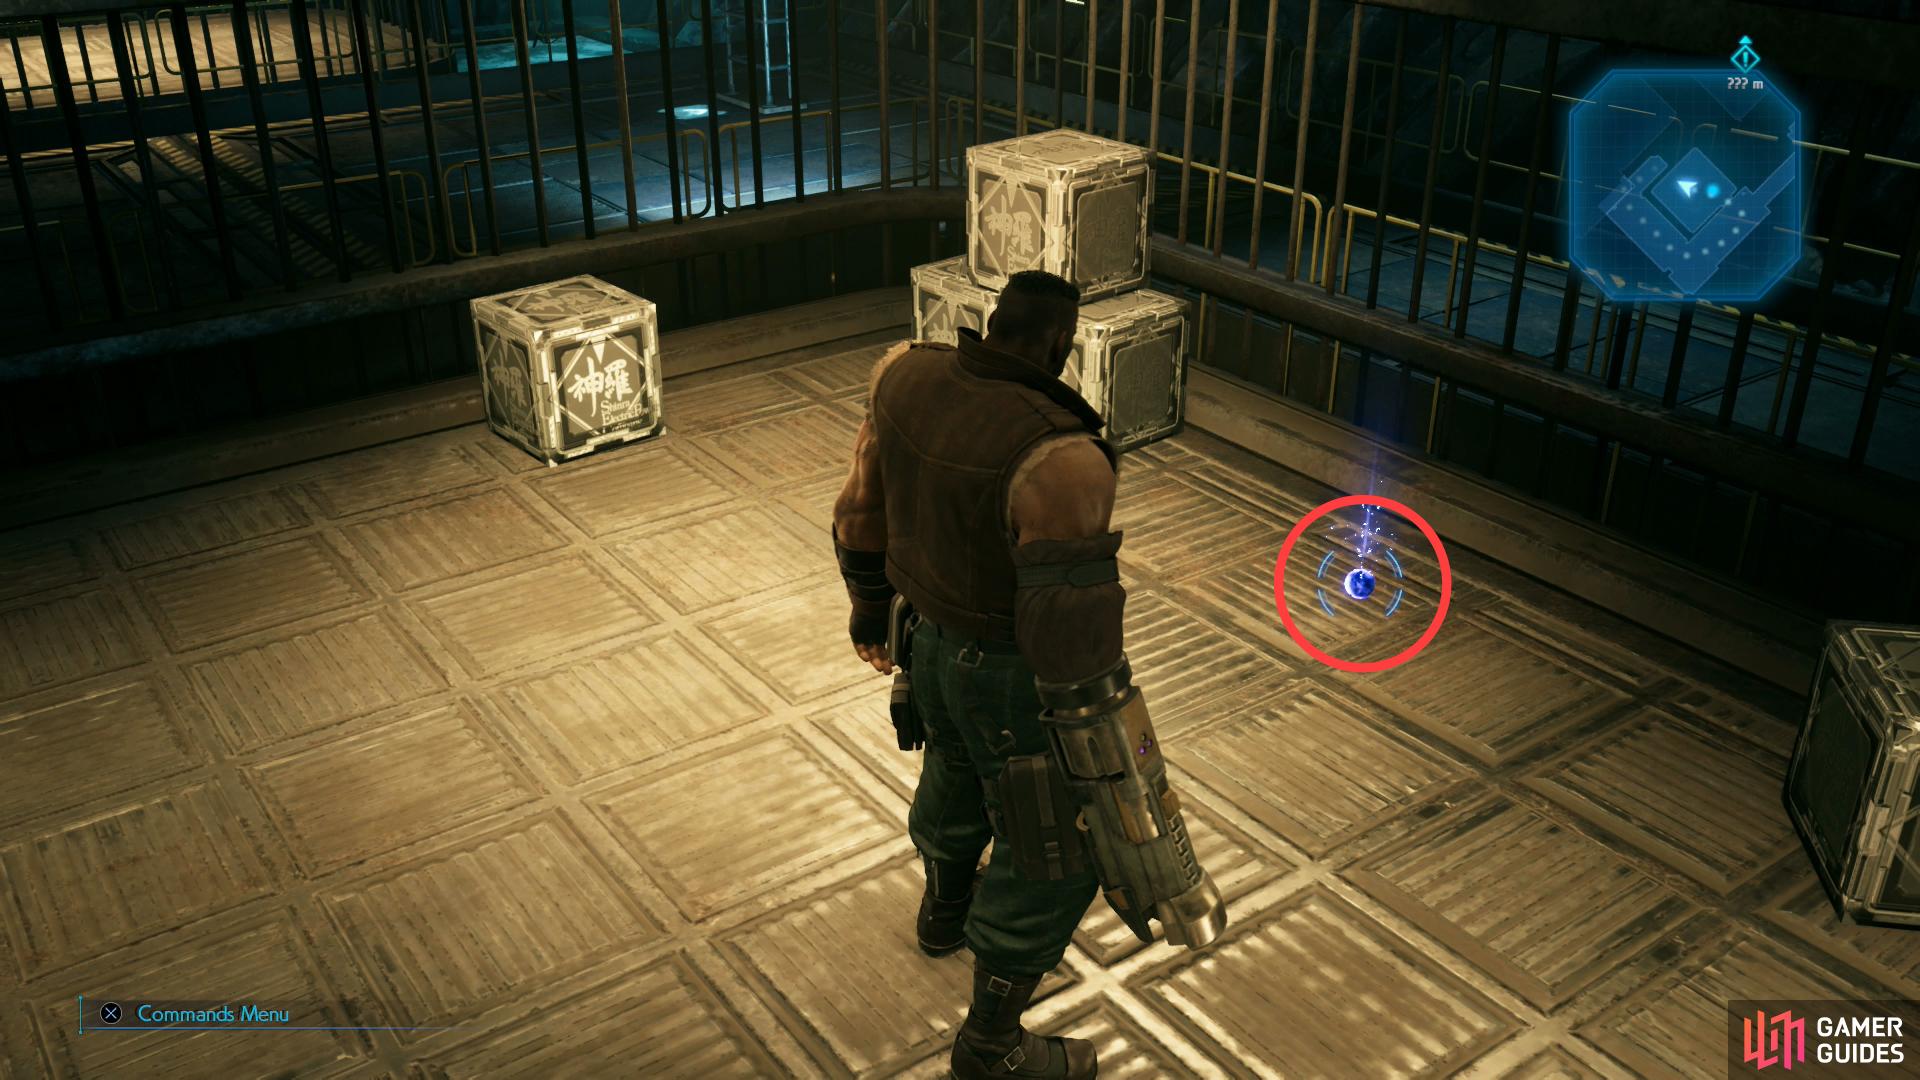 An orb of Warding Materia can be found in another cage.